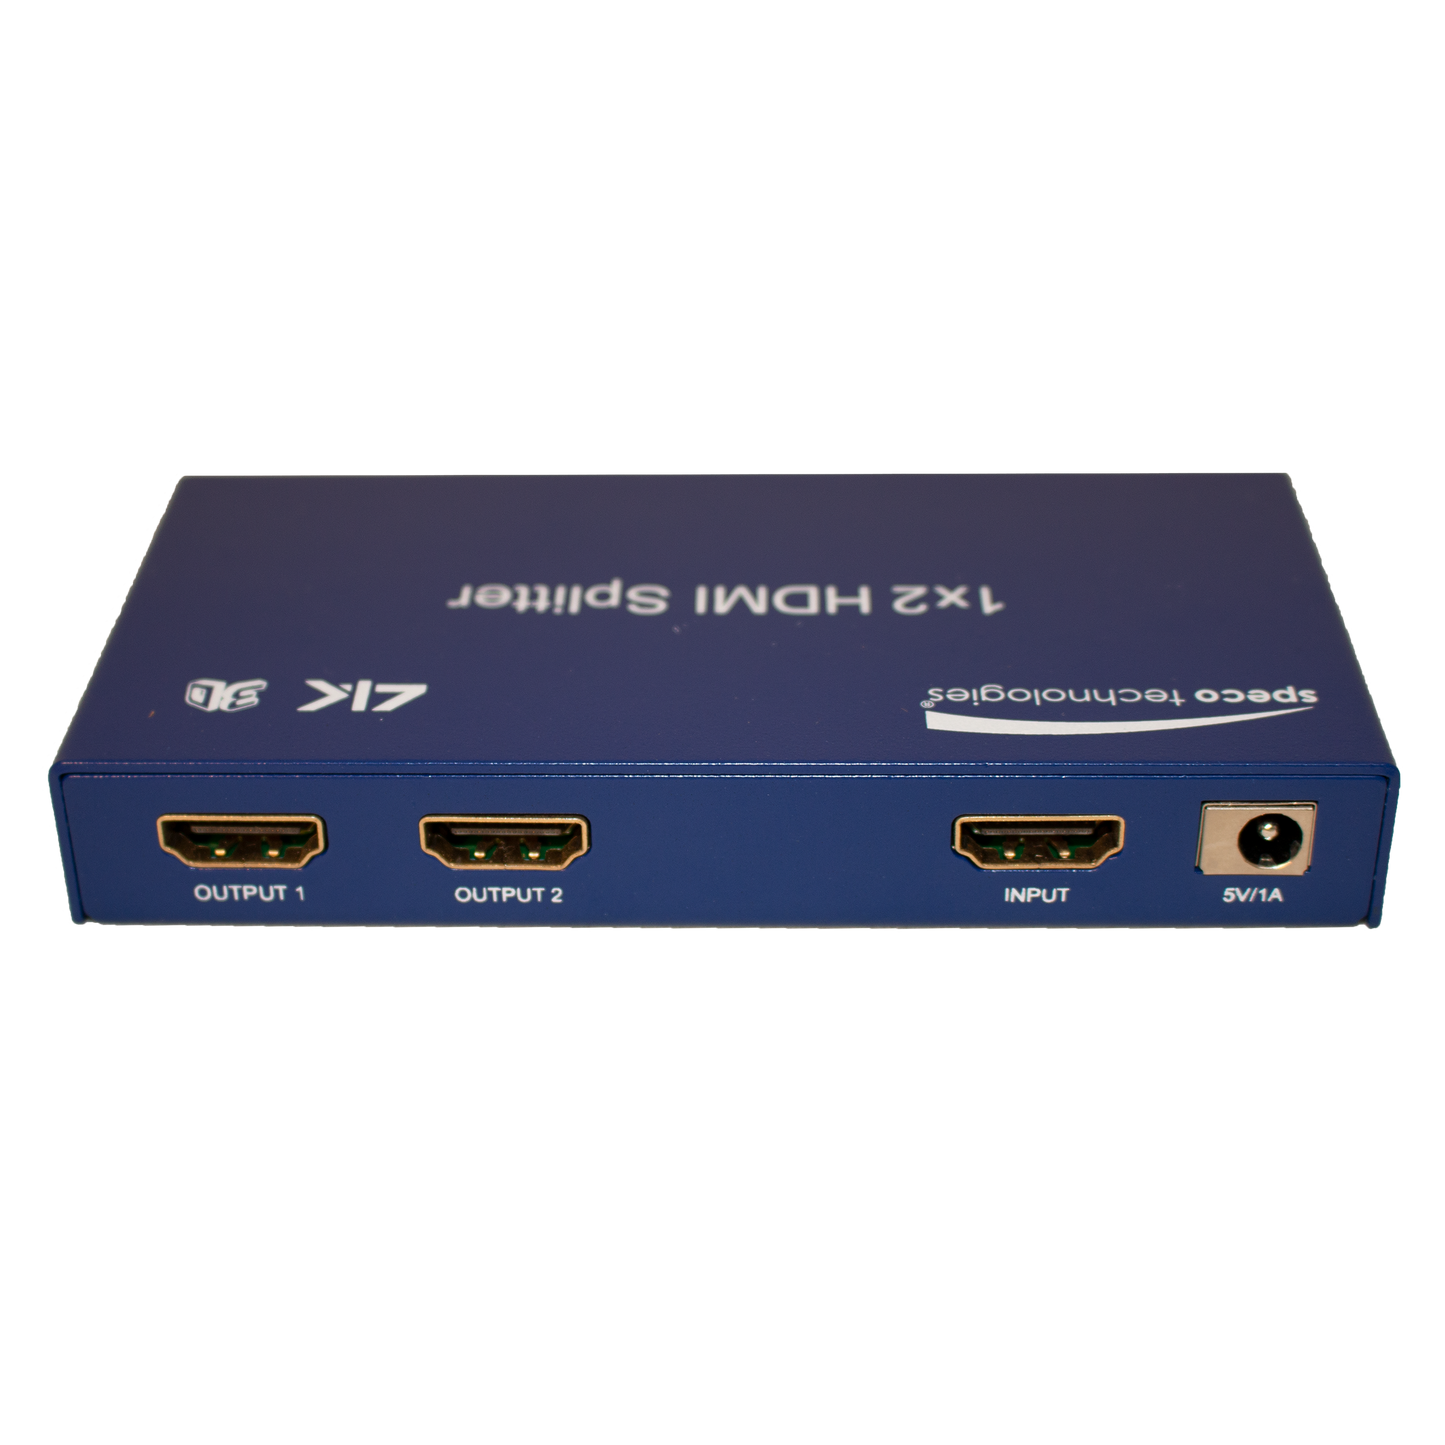 HDMI 1 to 2 Splitter- Res up to 4K